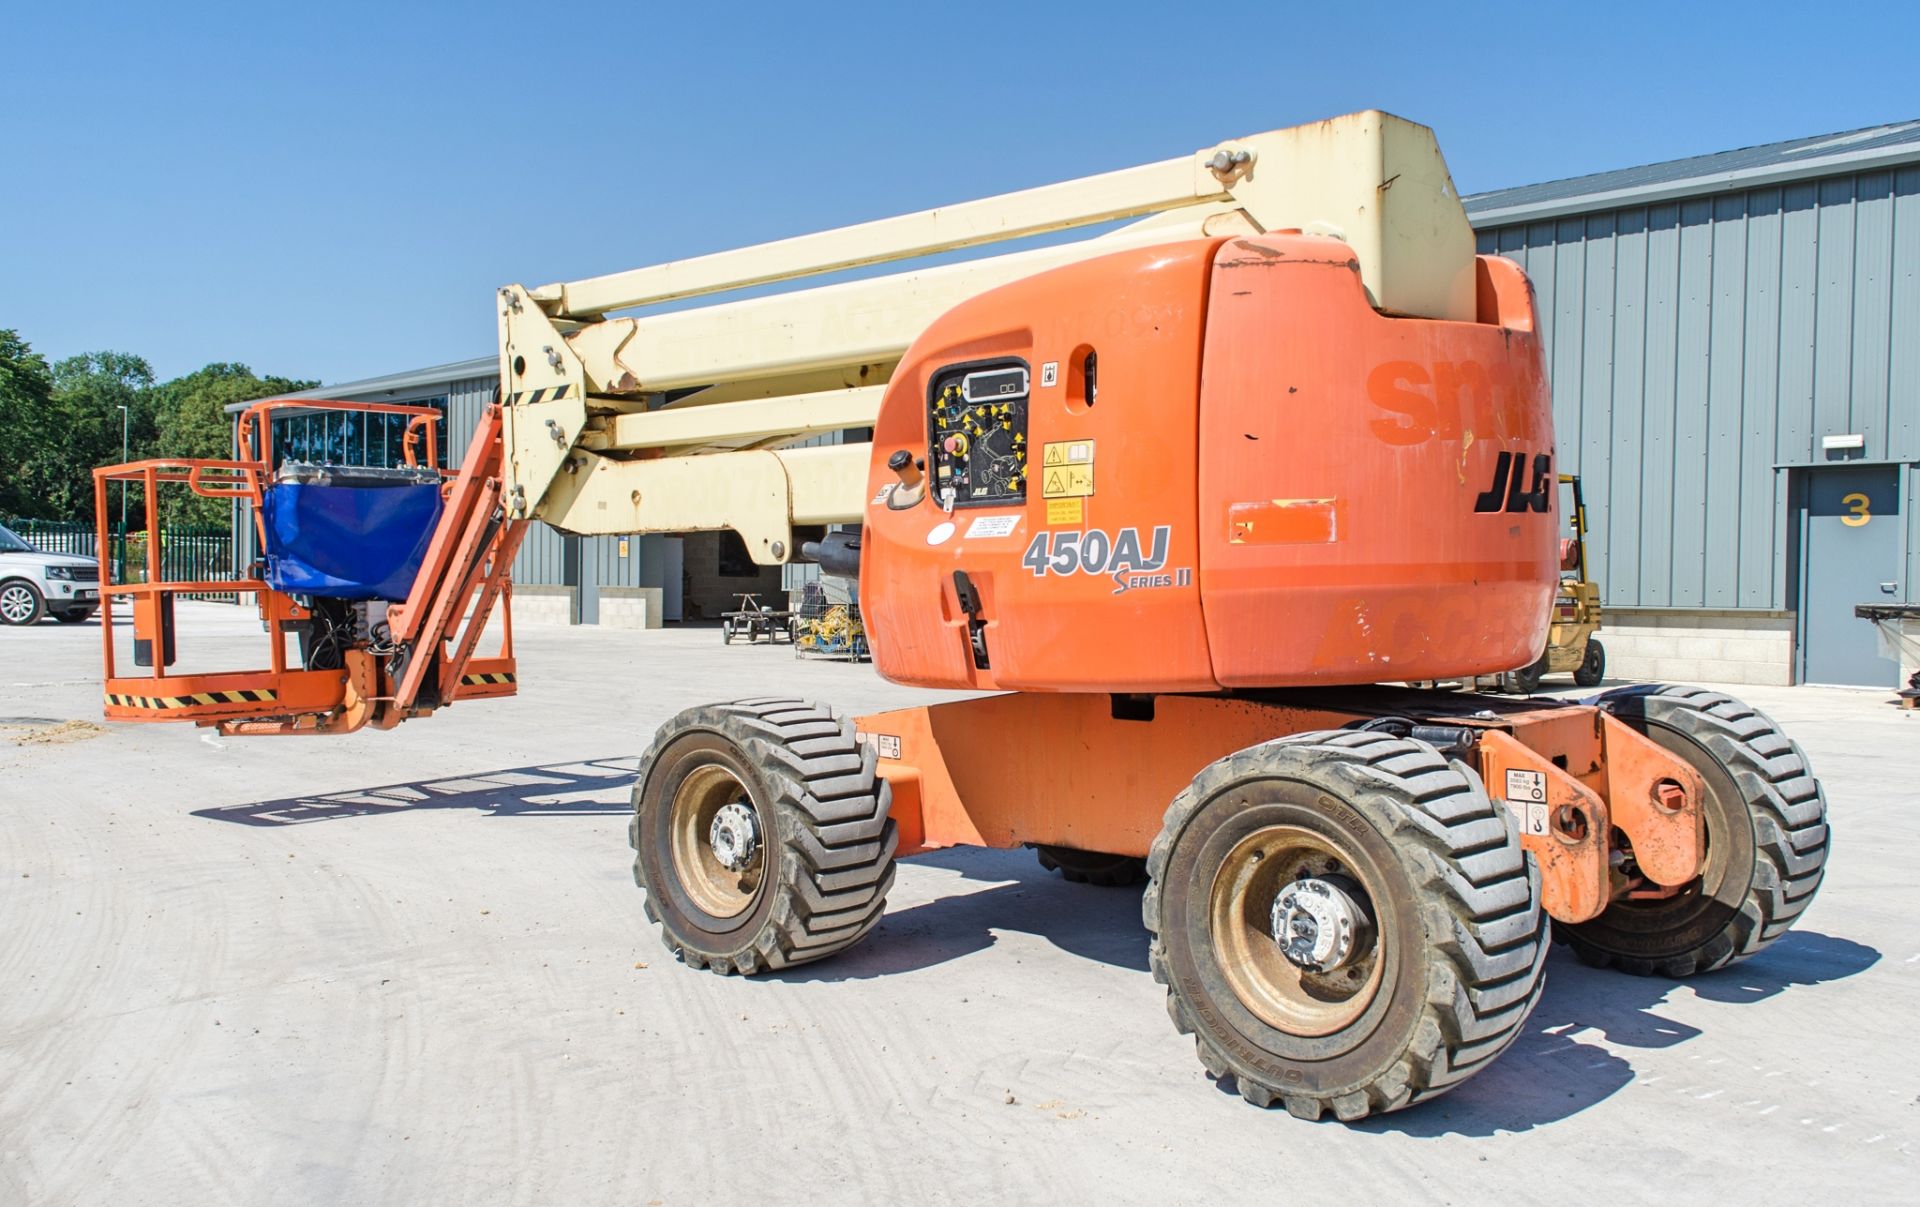 JLG 450AJ SII 45 foot diesel driven 4WD articulated boom lift Year: 2008 Recorded hours: 3300 S/N: - Image 3 of 18